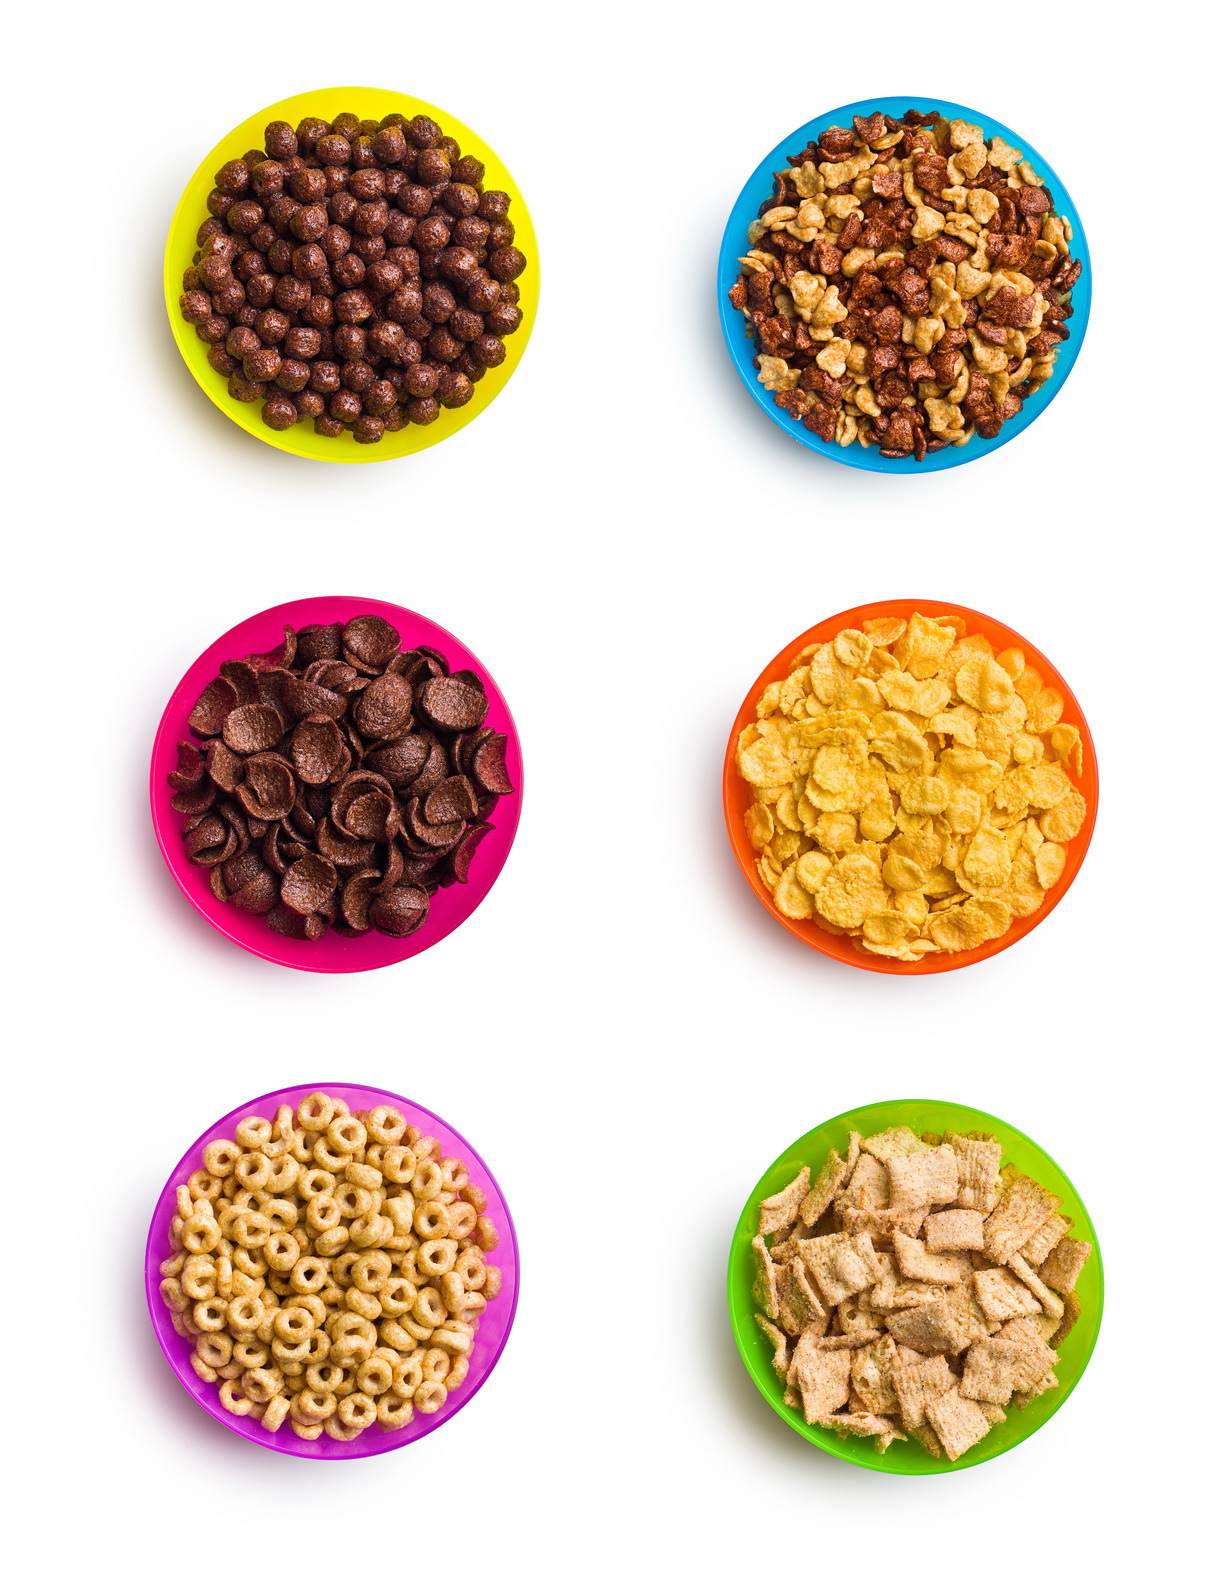 Cereal Makers Looking Abroad to Prop Up Growth - Food Institute Focus